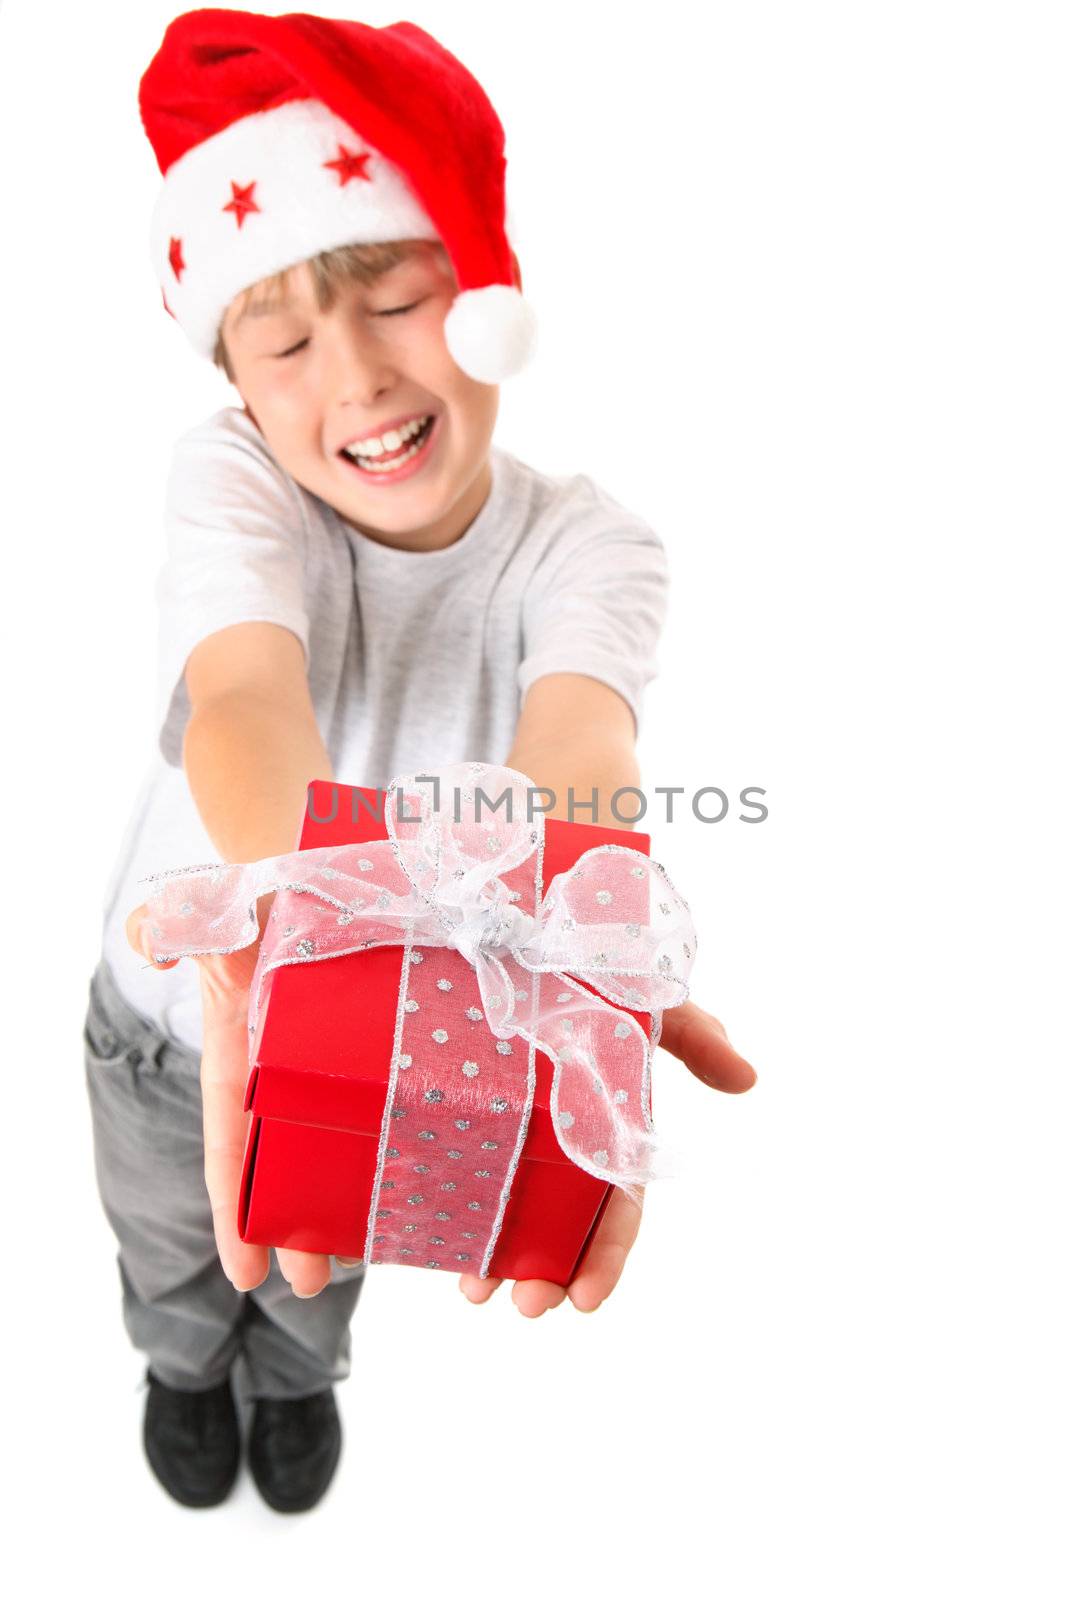 A happy child hands up a present wrapped with silver gauze ribbon in the spirit of Christmas. Selective focus to the gift only.  Boy is not in focus.